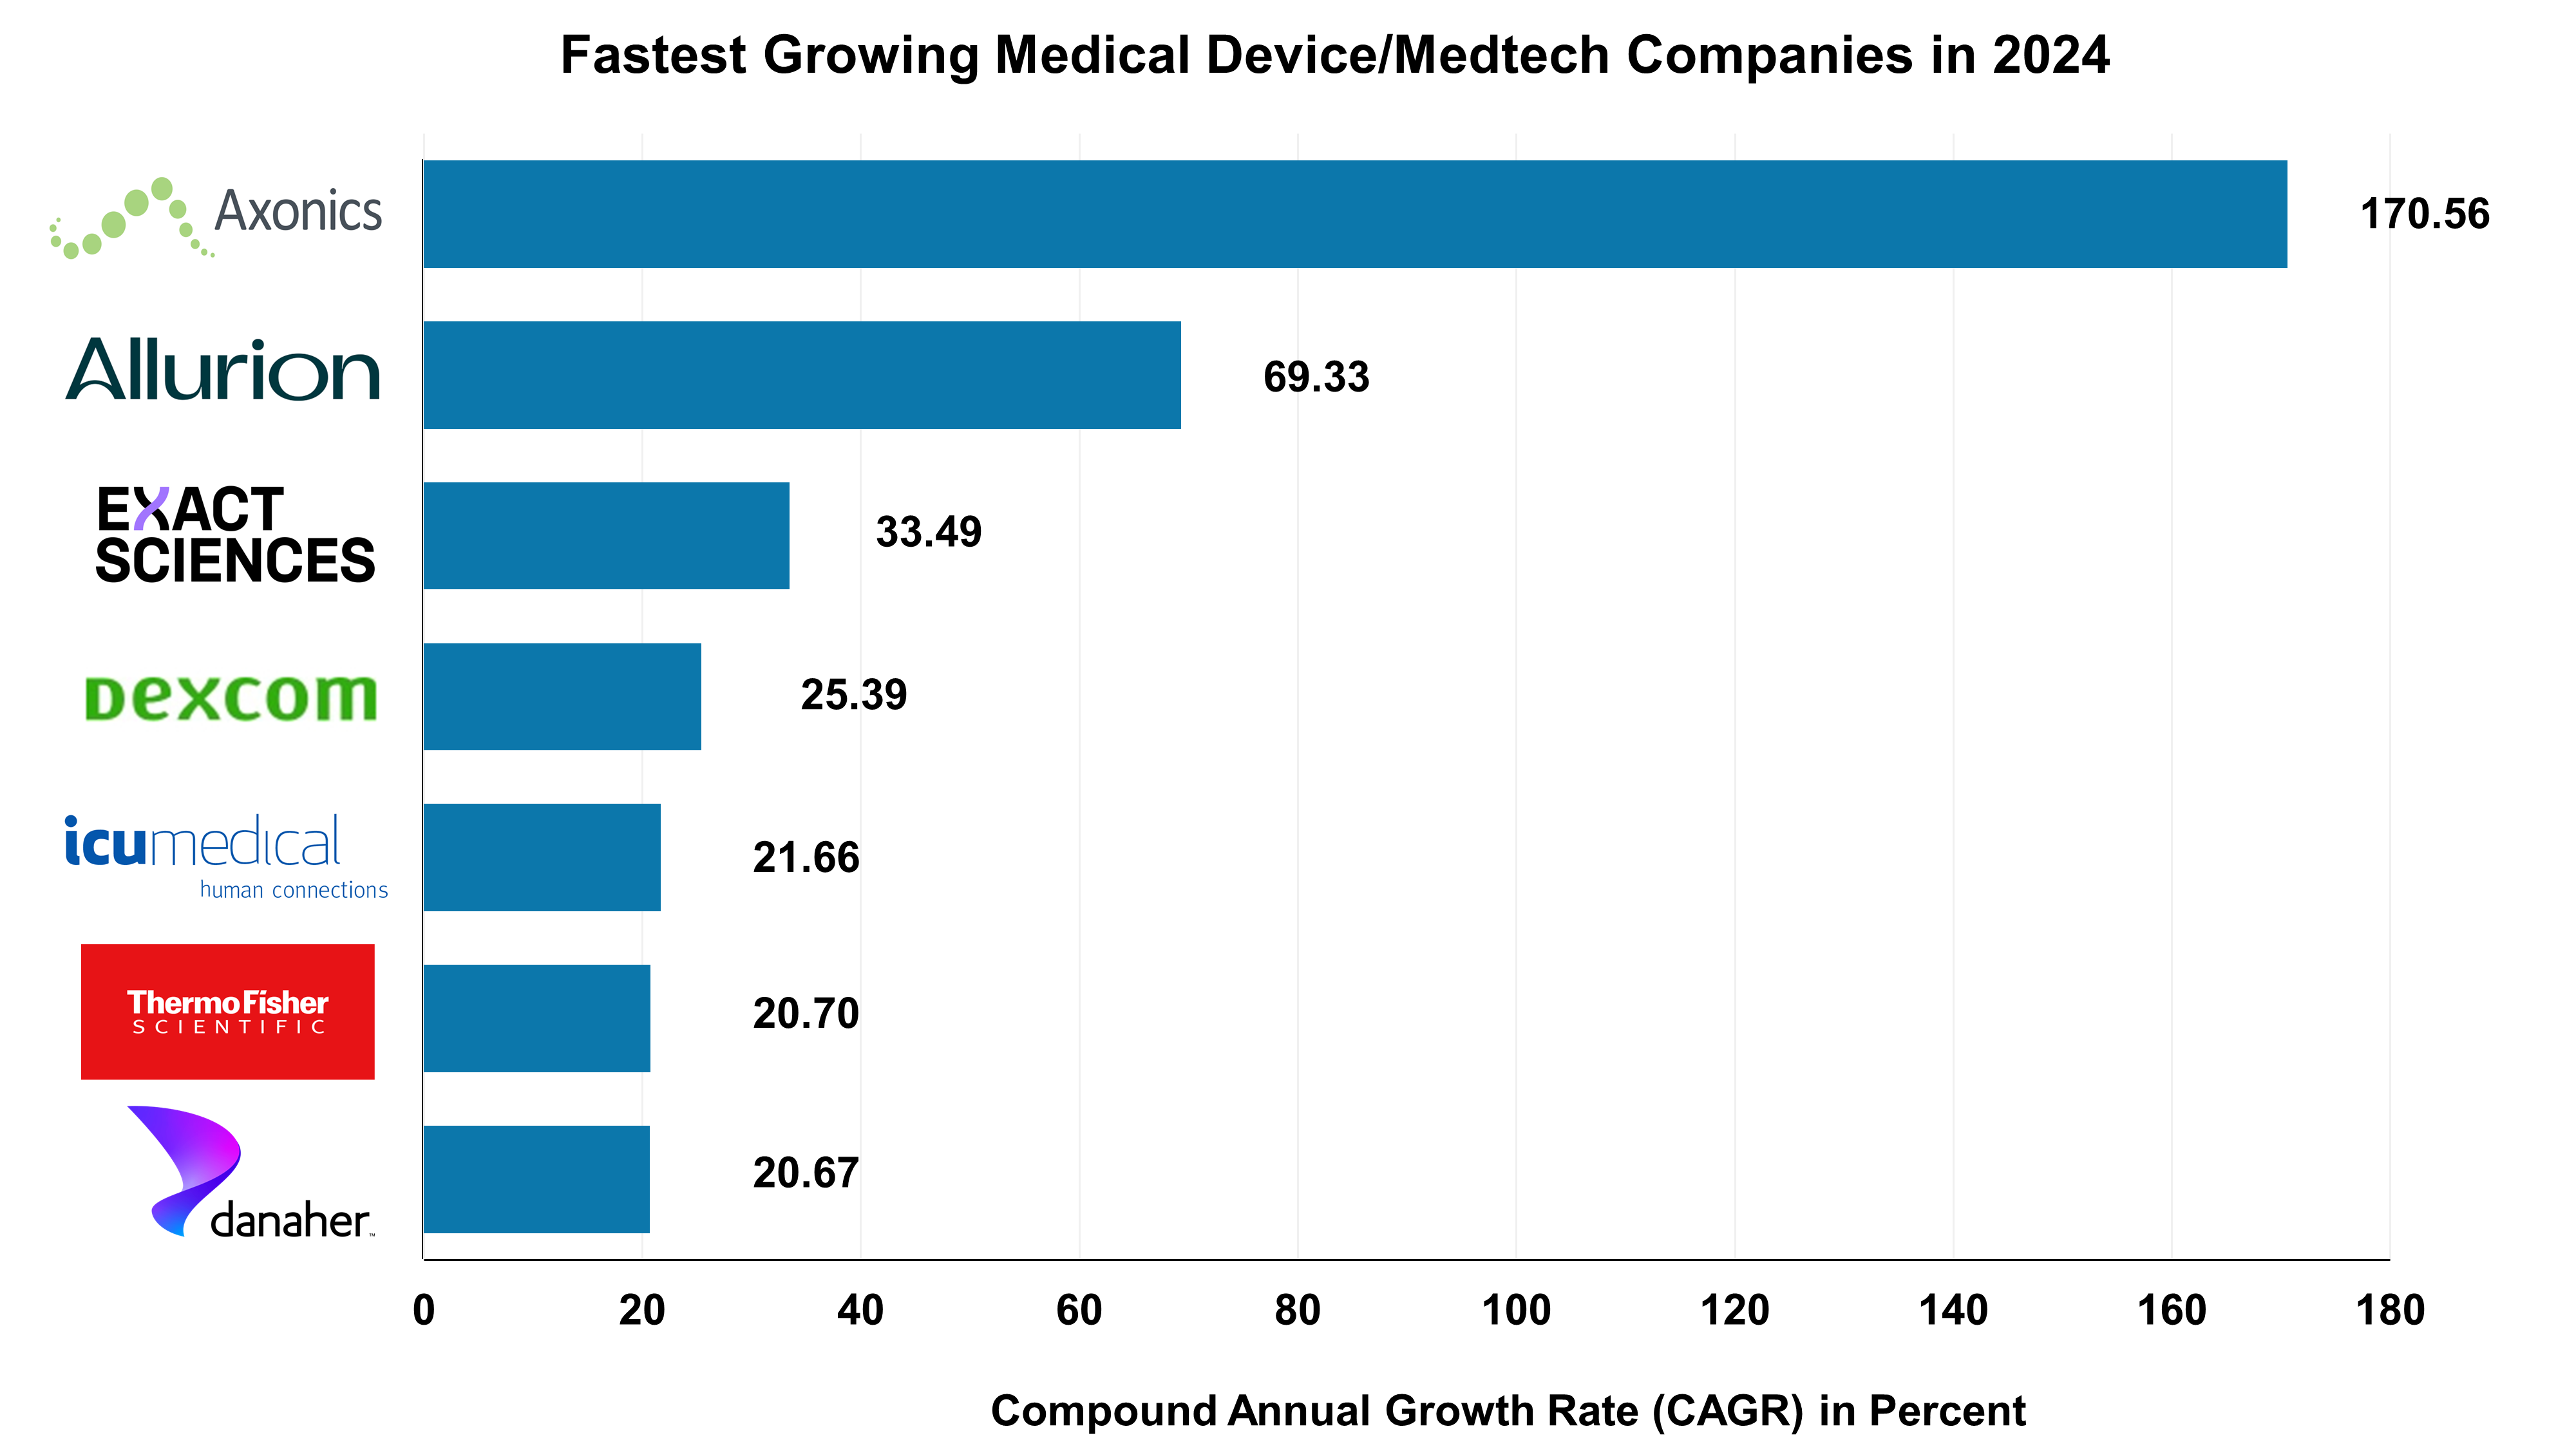 Fastest growing medical device/medtech companies in 2024